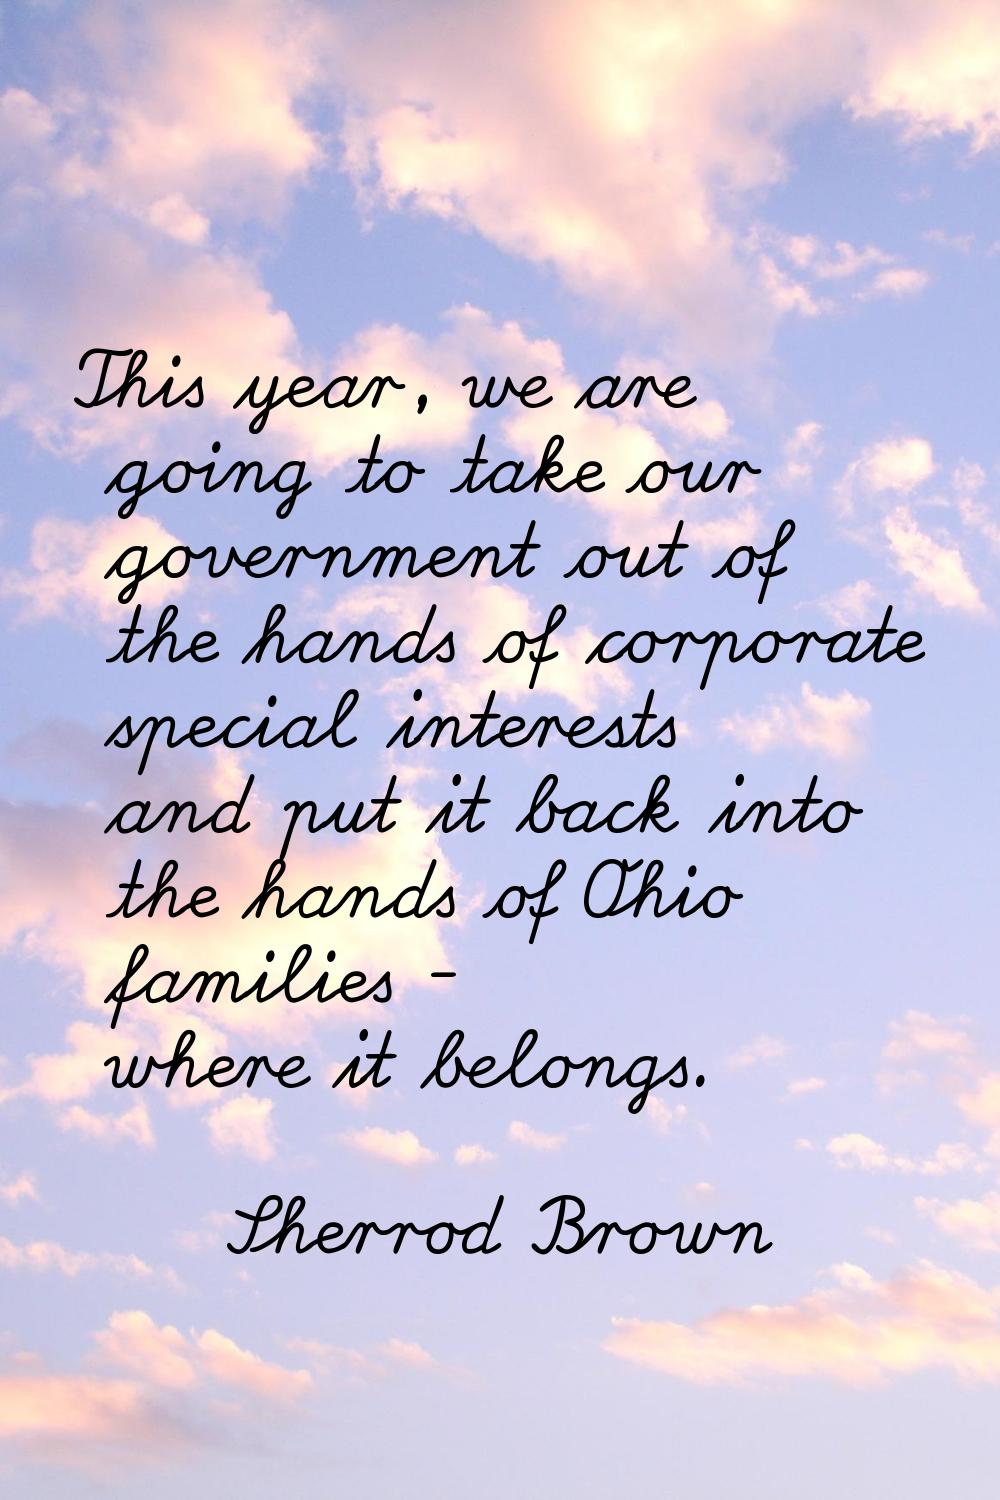 This year, we are going to take our government out of the hands of corporate special interests and 